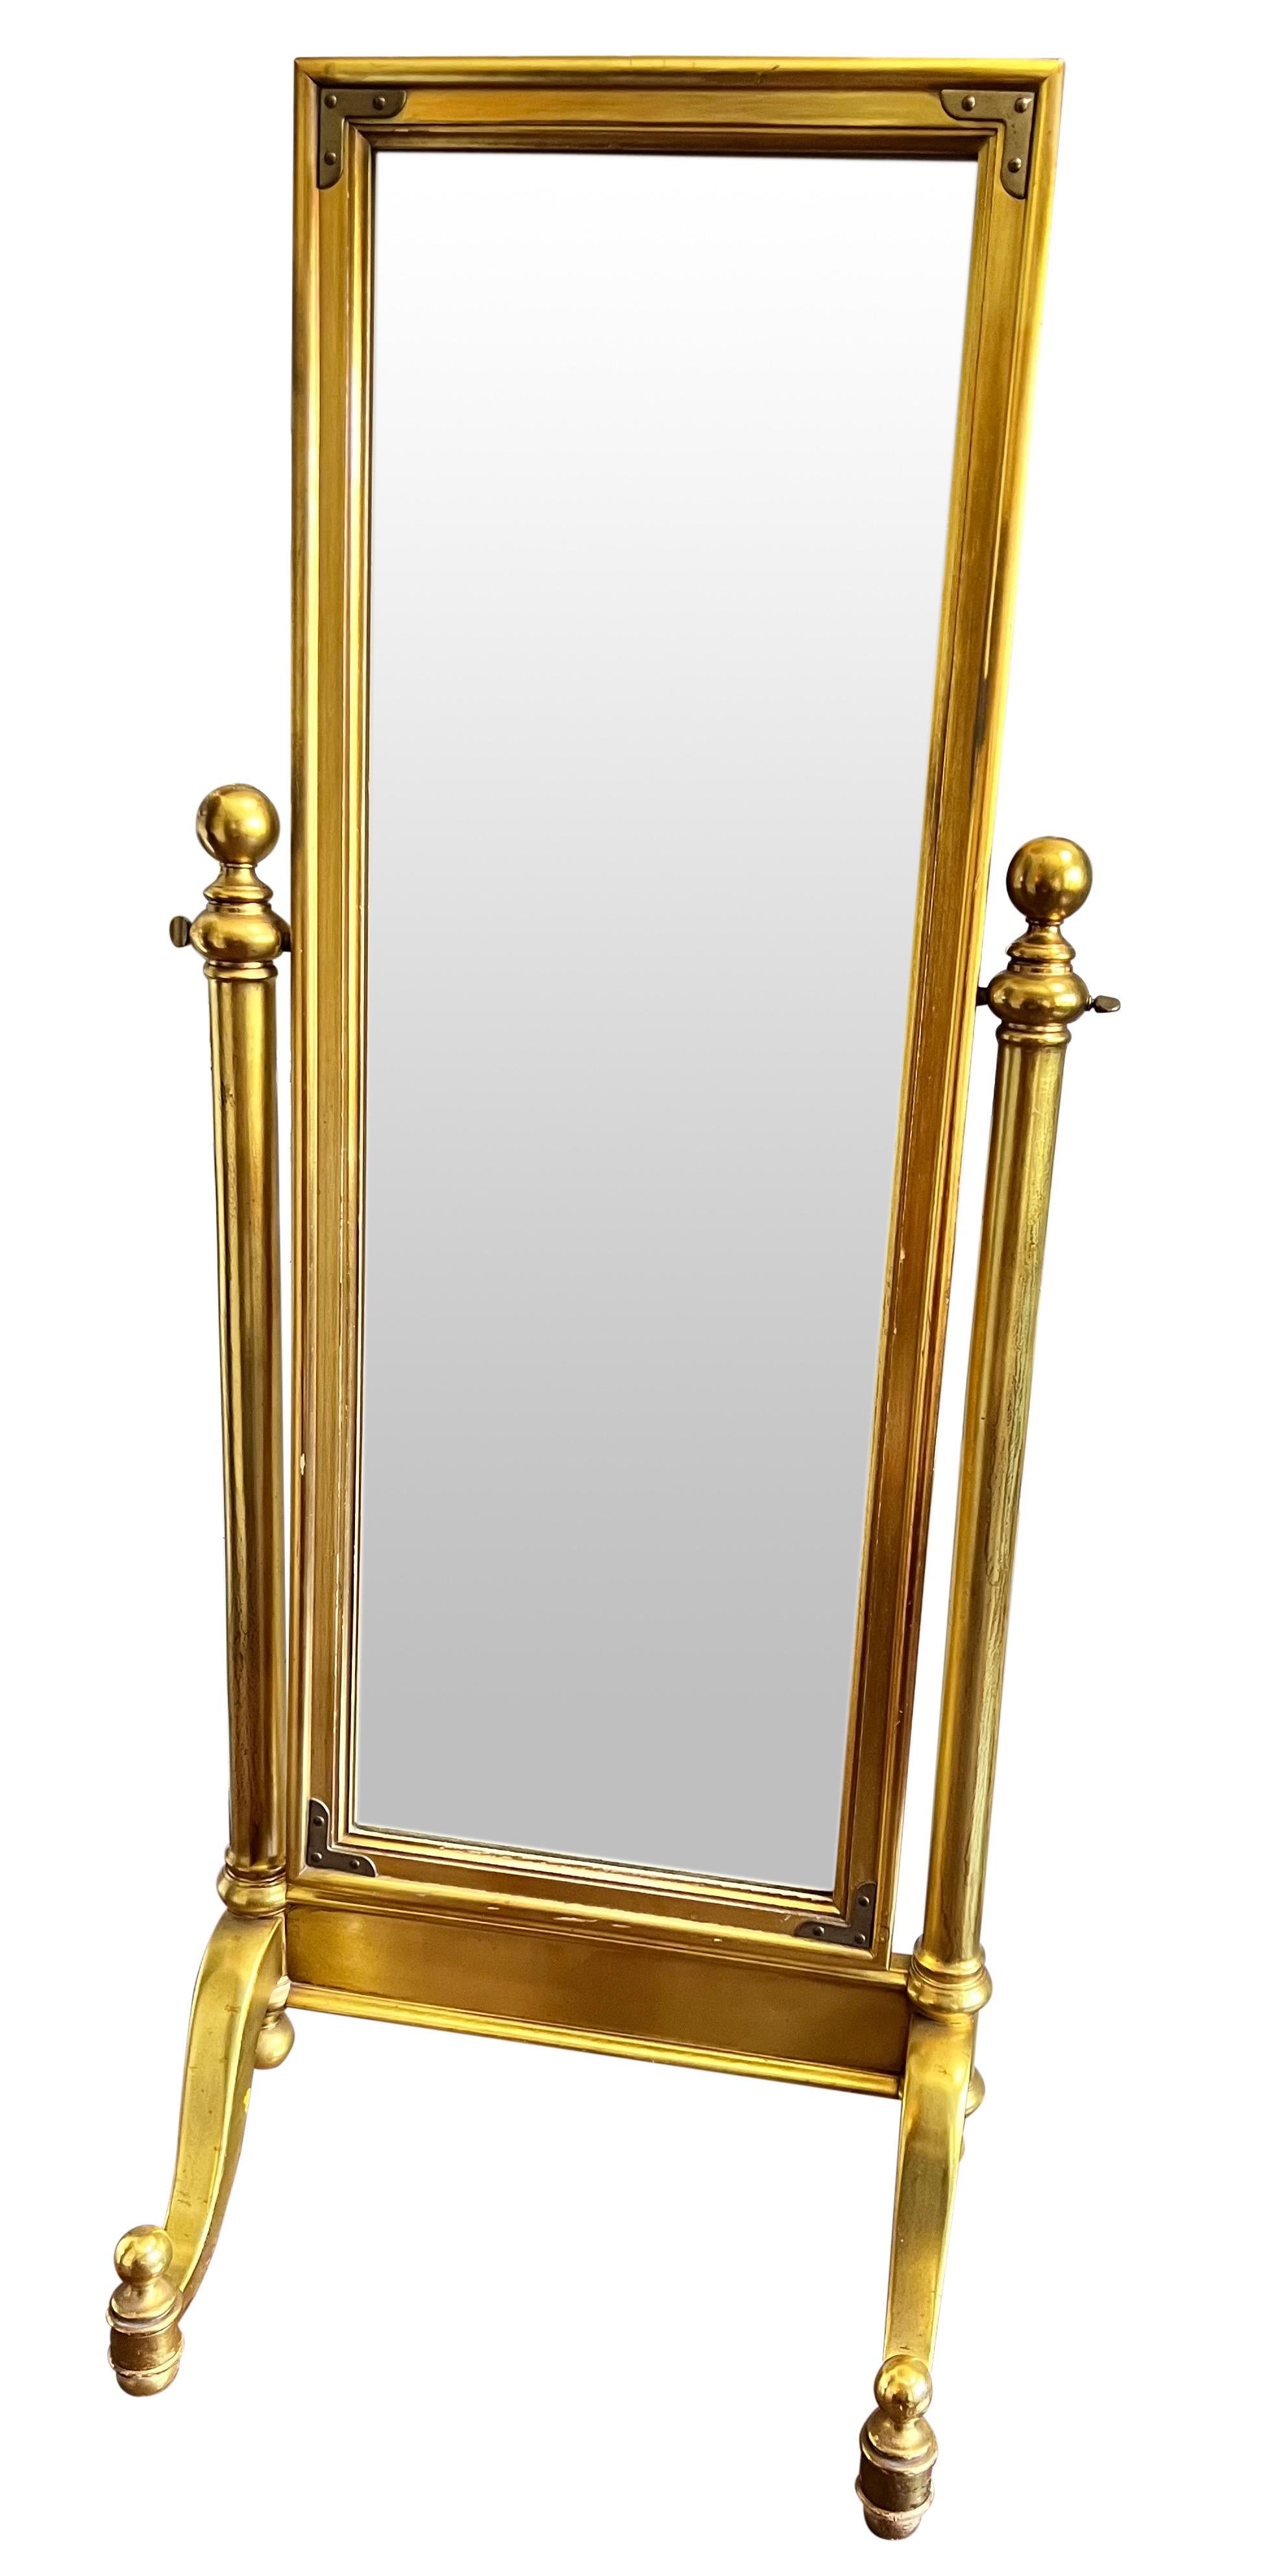 Fabulous 1970's giltwood cheval mirror. Sturdy and well crafted, the mirror sits on a graceful base with ball finials and feet. It features fine trim with decorative brass corner accents. A stately and elegant mirror with a lustrous gold patina.